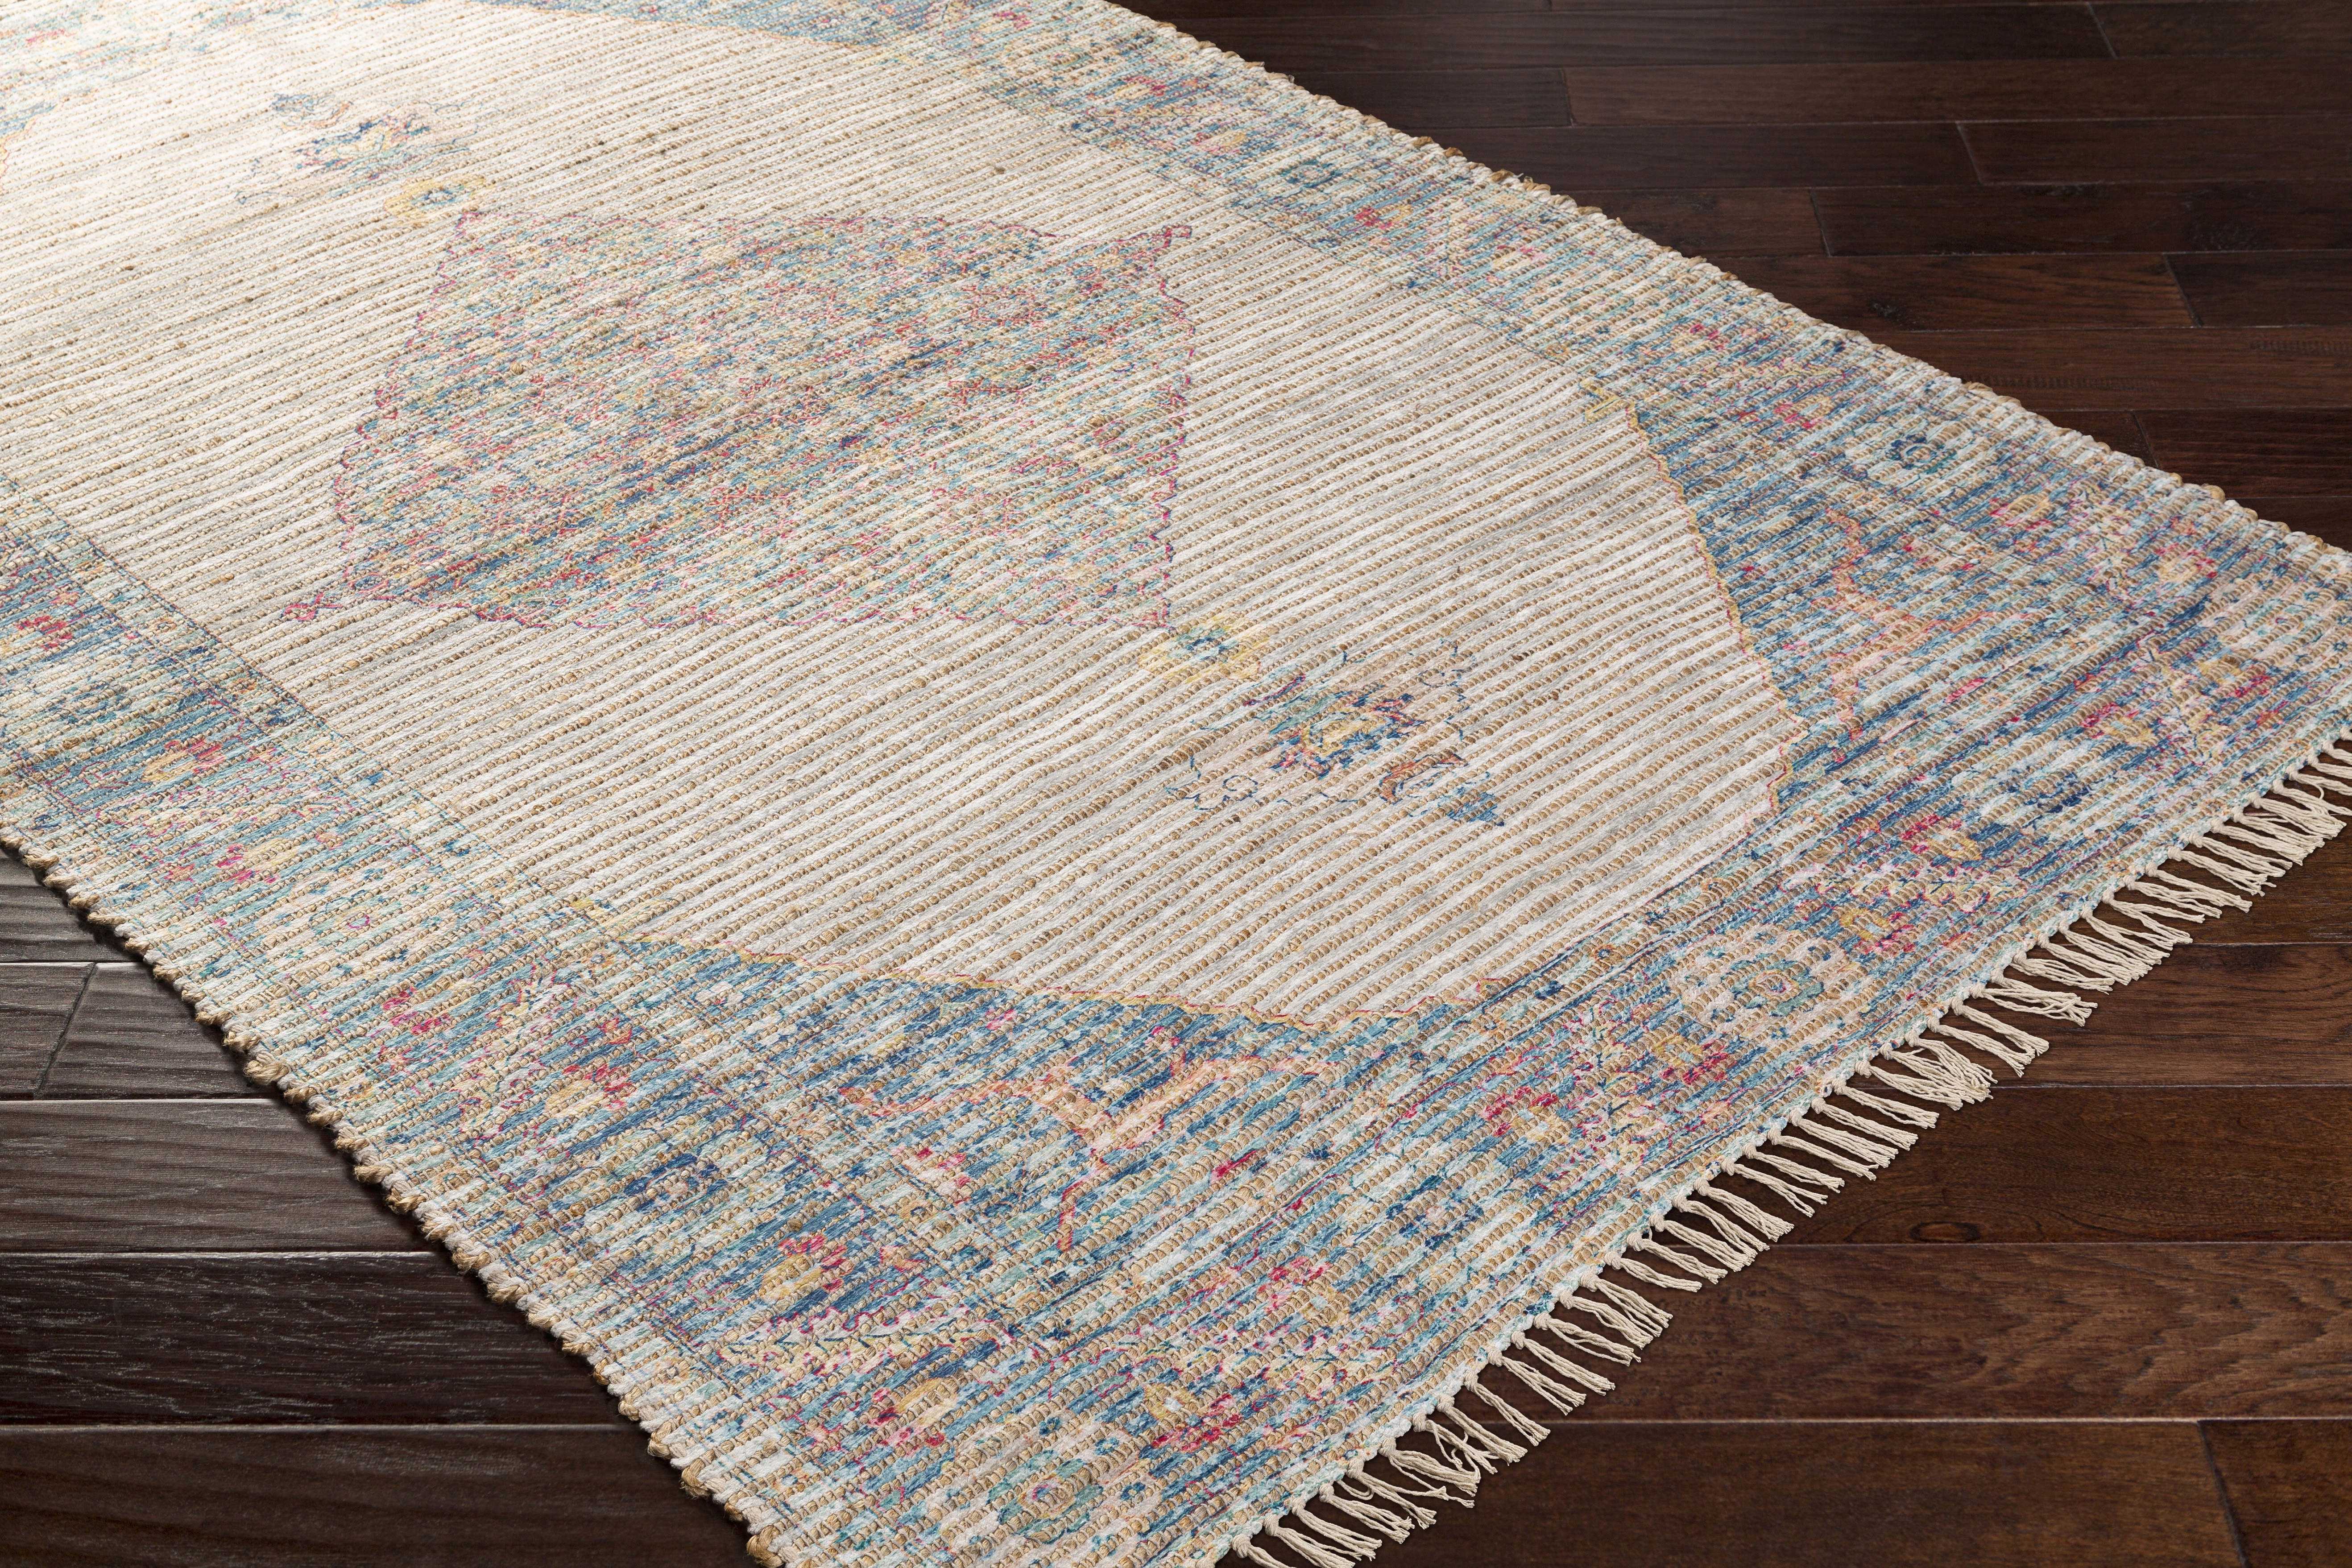 Coventry Rug, 2' x 3' - Image 6